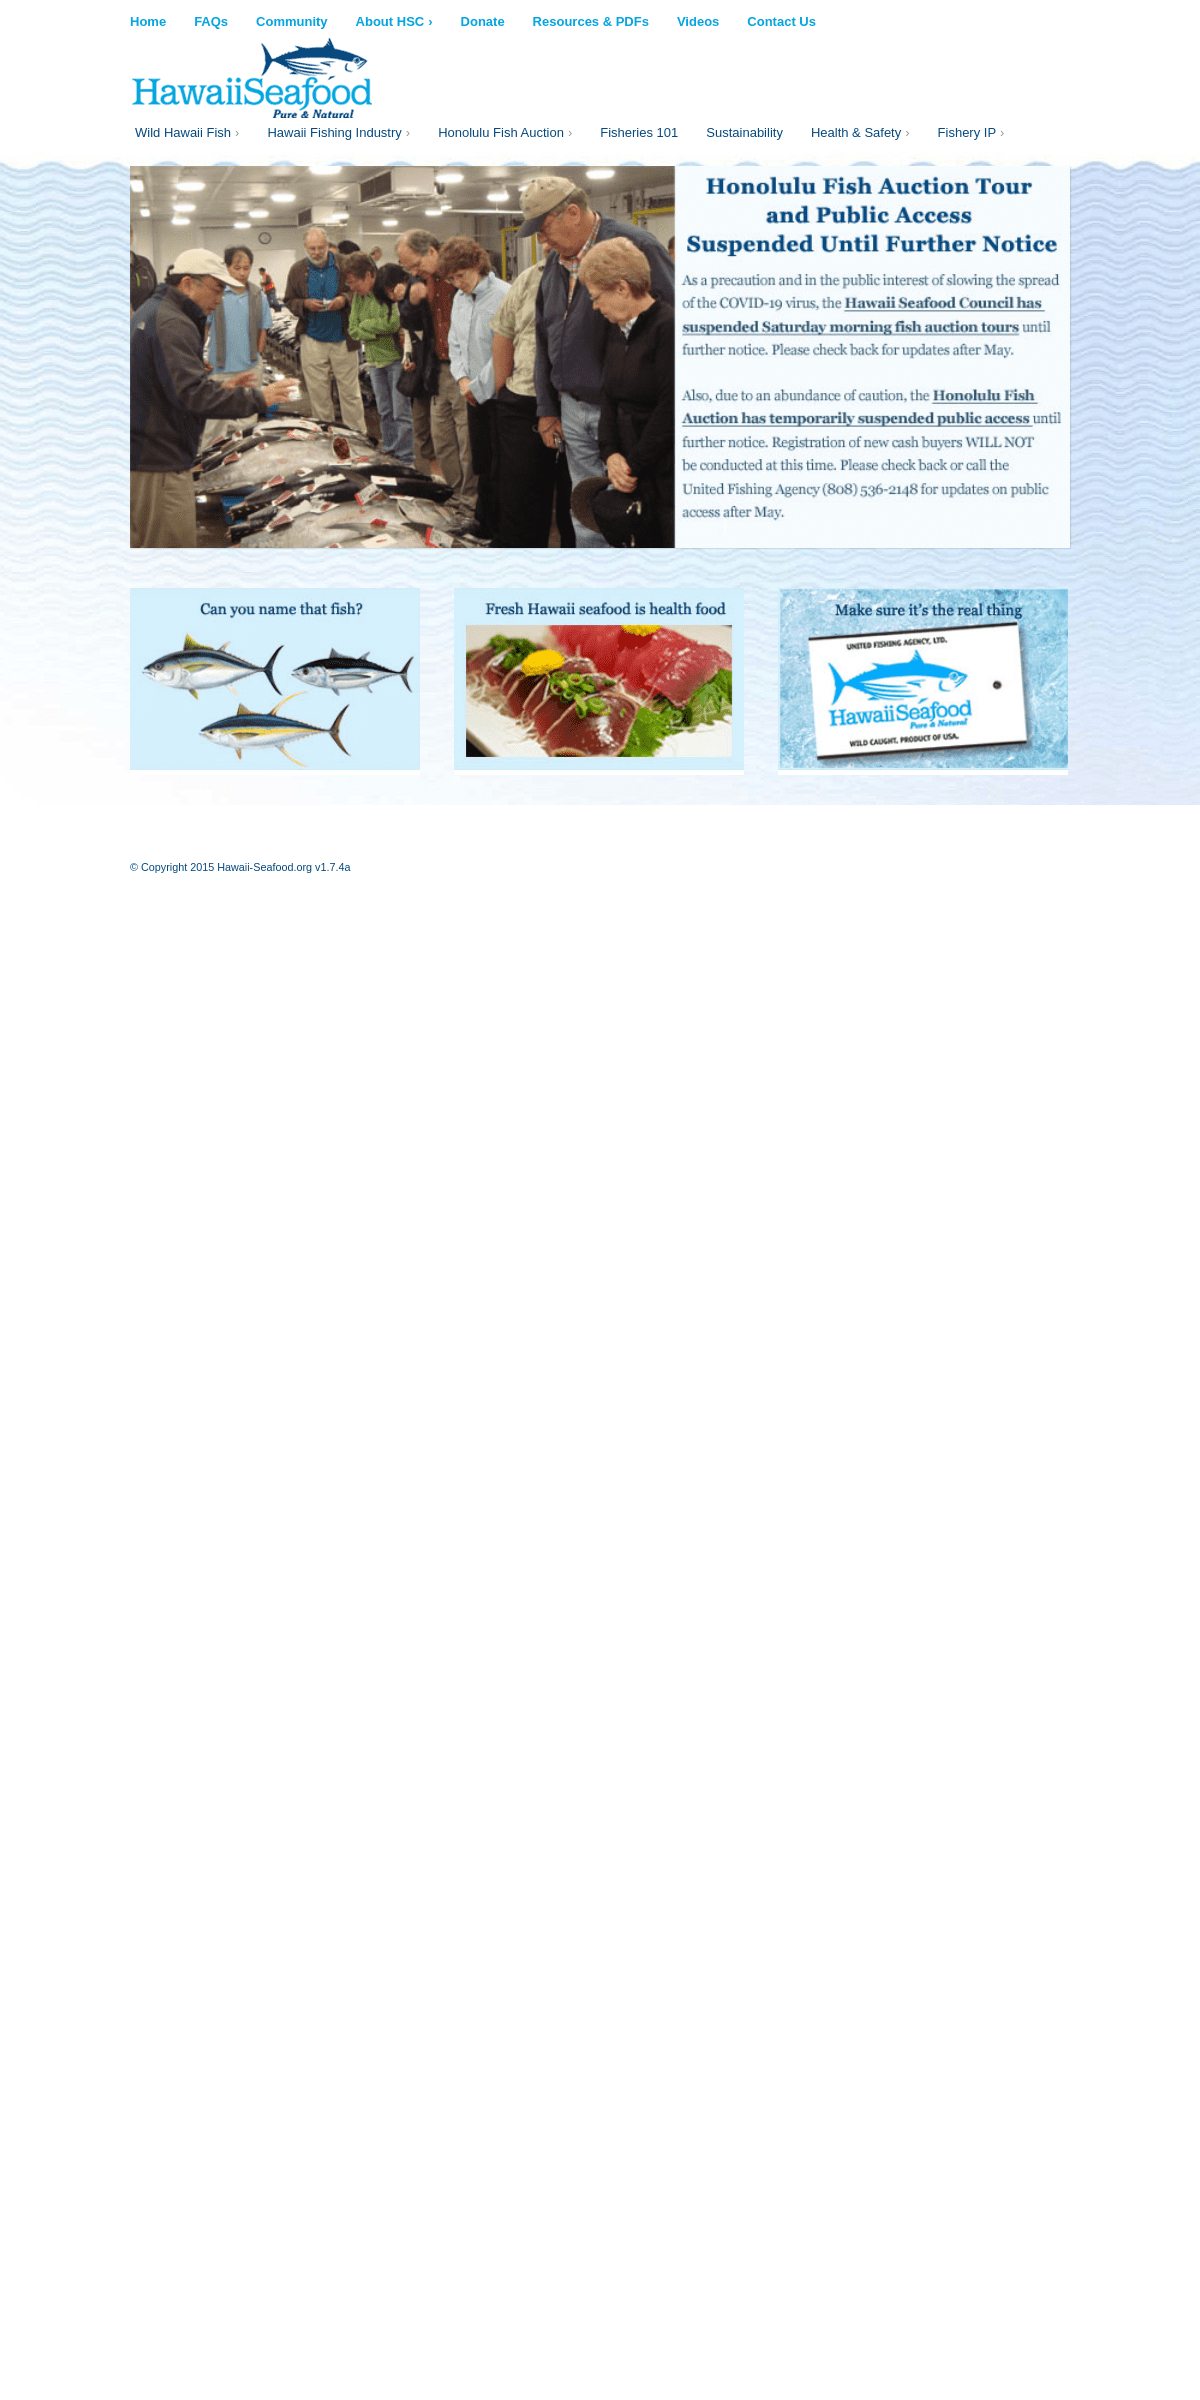 A complete backup of hawaii-seafood.org